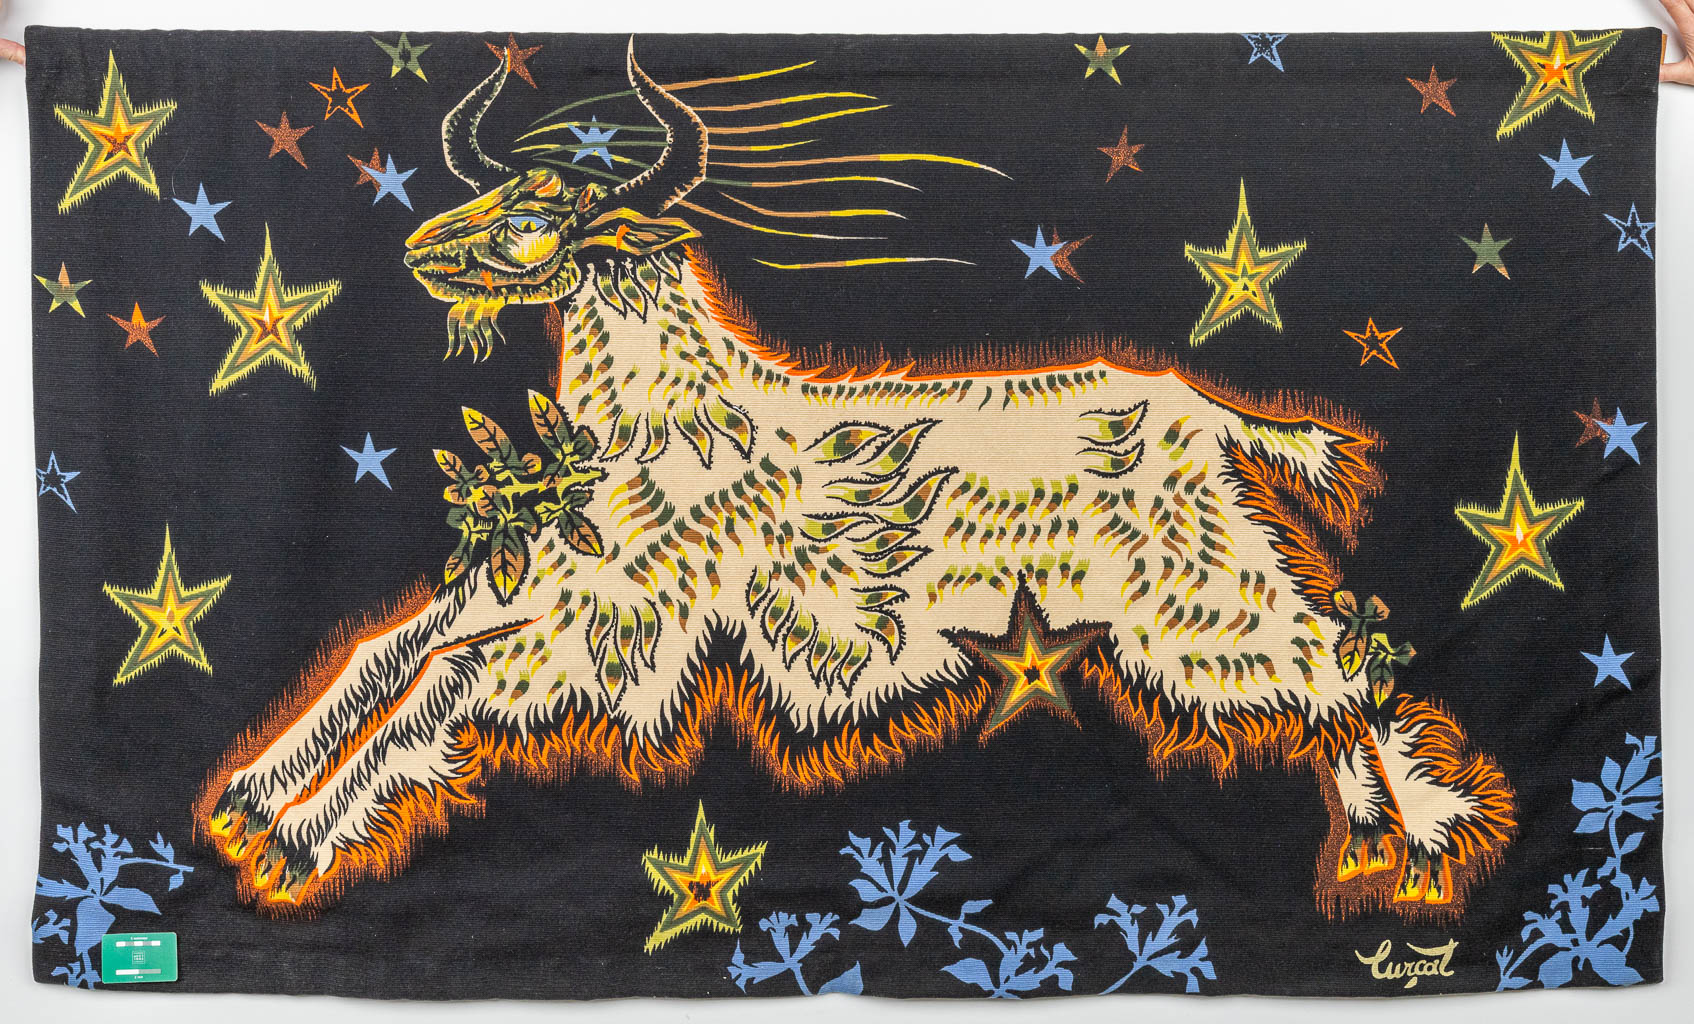 Jean LURÇAT (1892-1966) 'D'Etoile' a tapestry, numbered 156. (H:109cm)